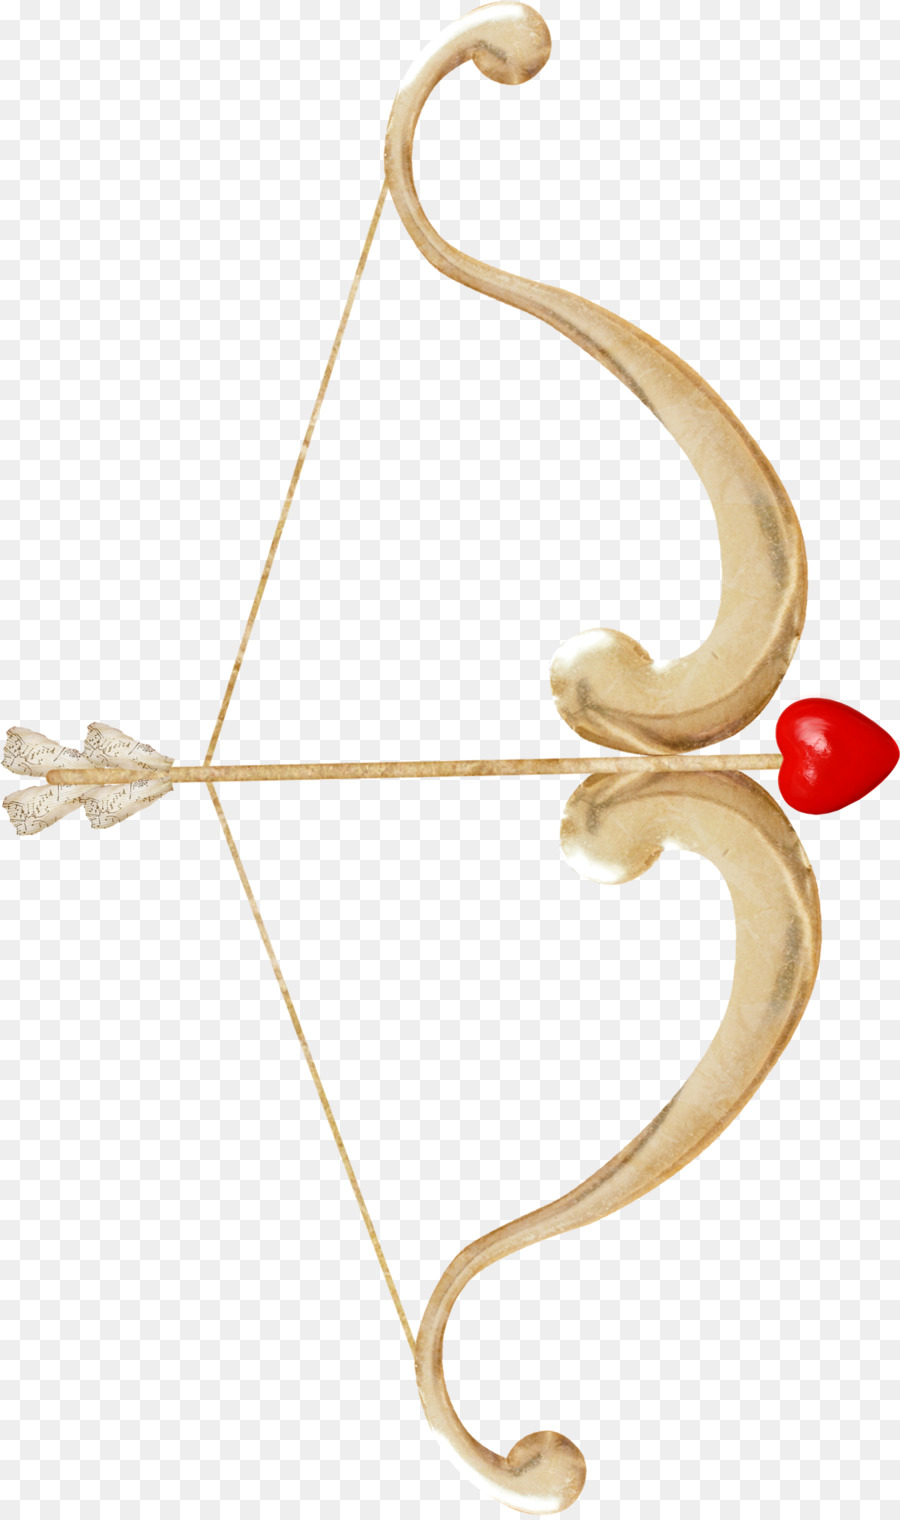 Bow And Arrow png download.